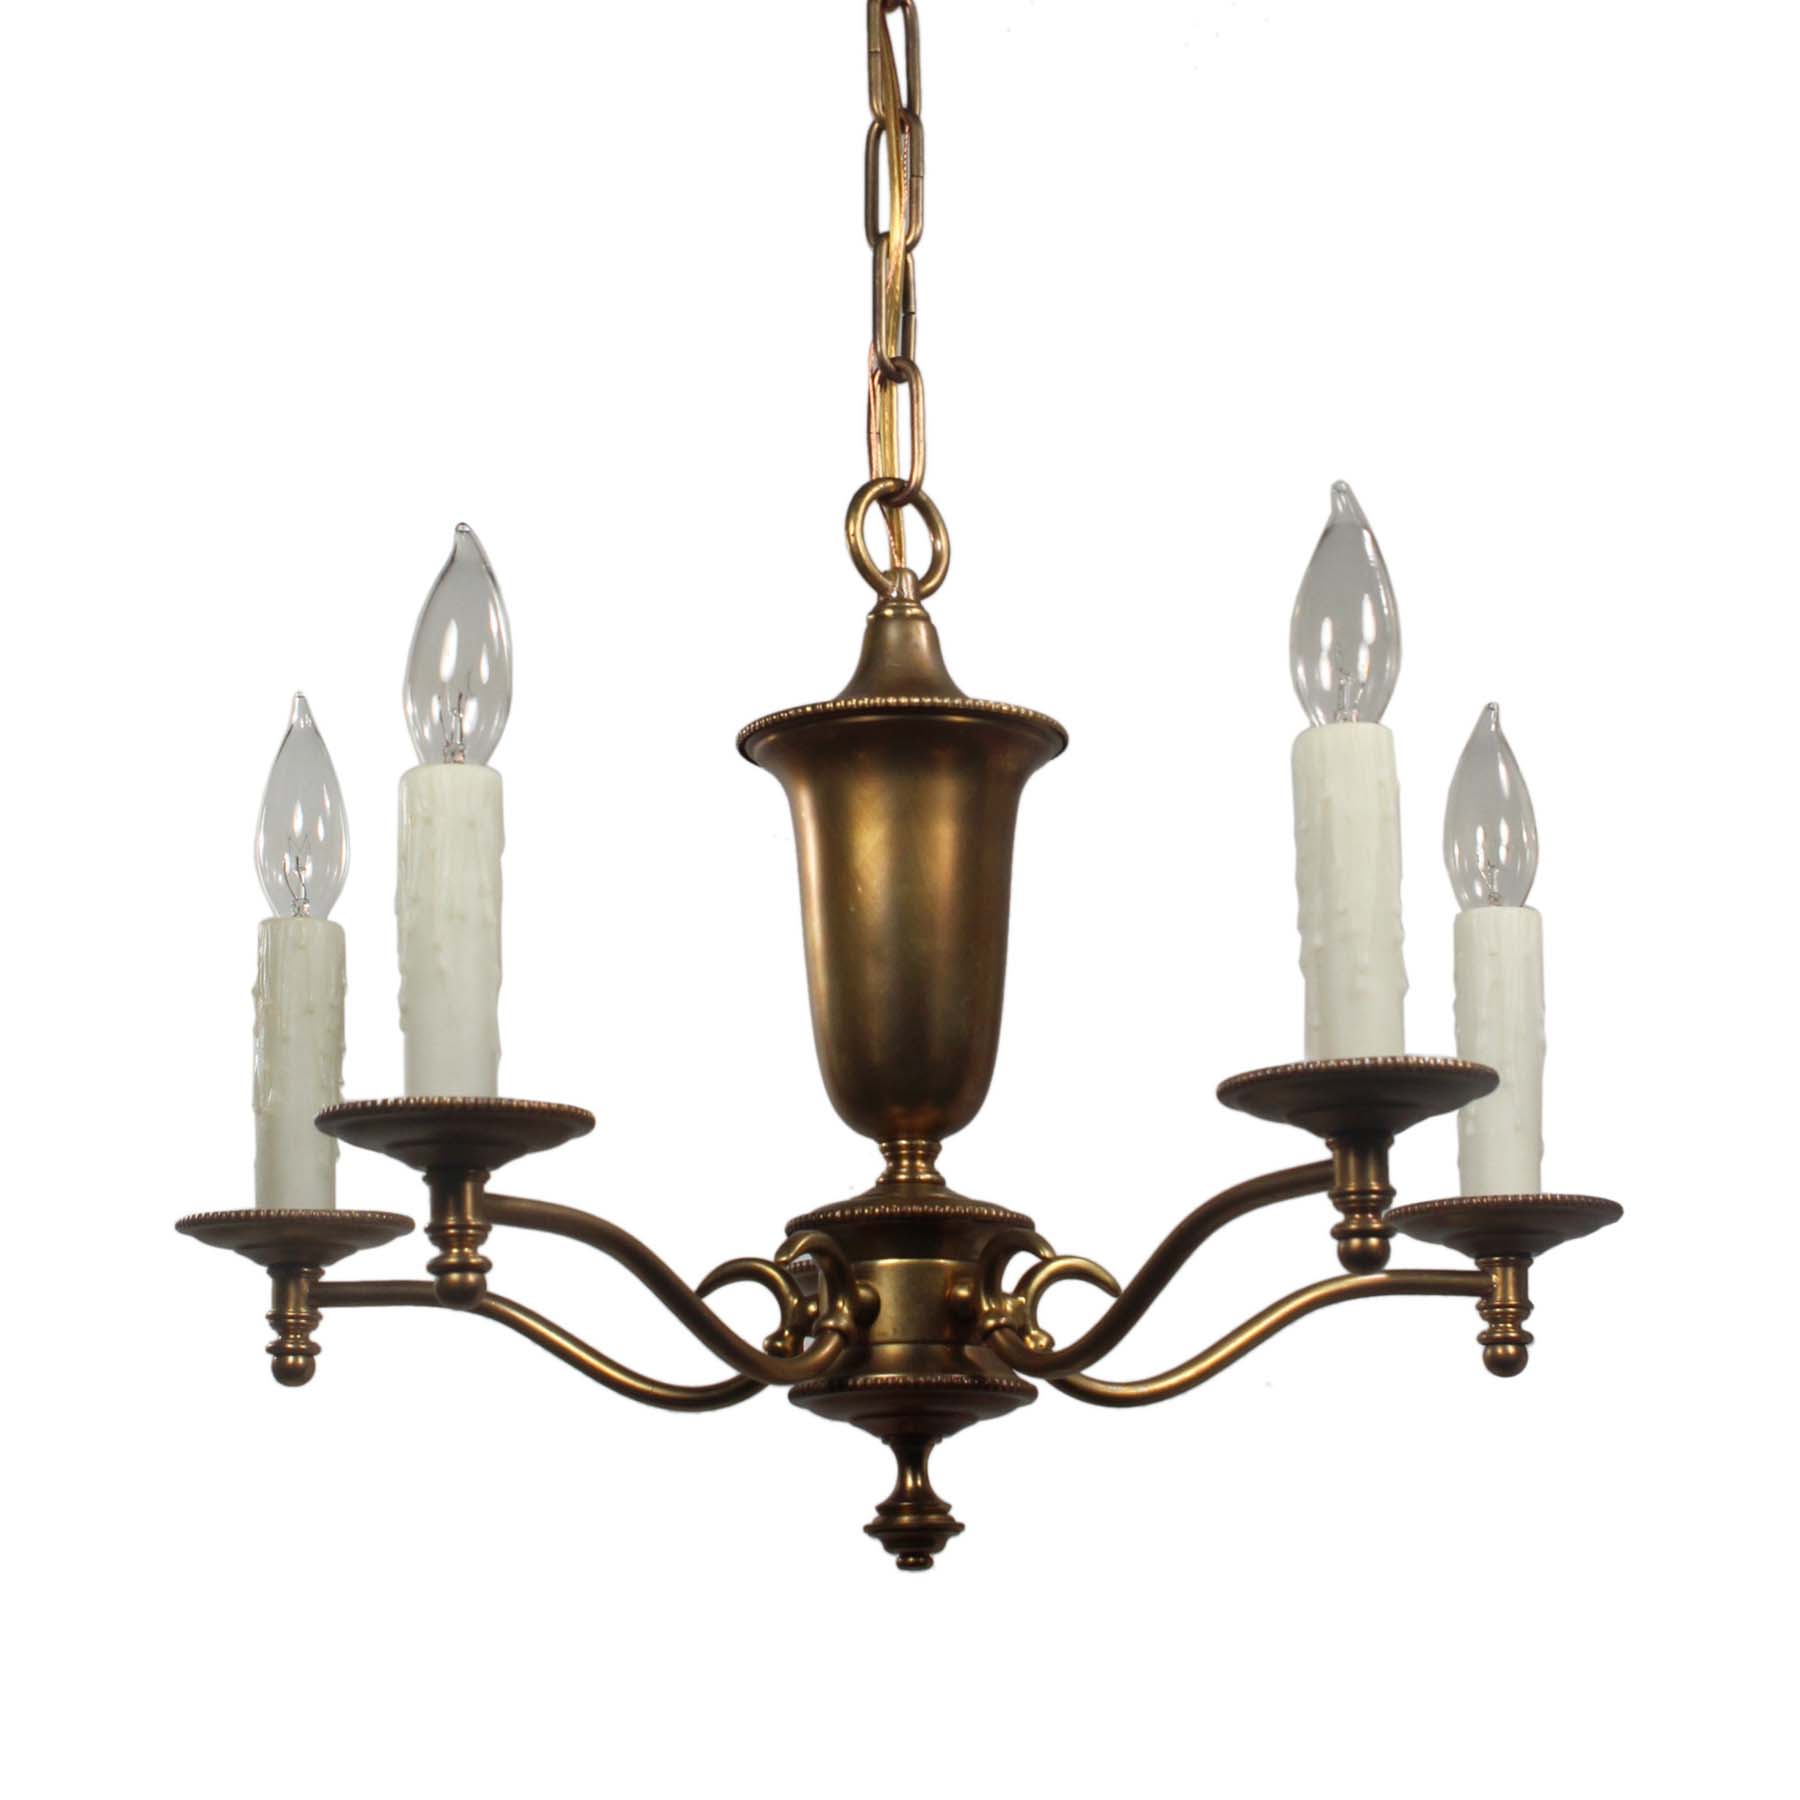 SOLD Antique Colonial Revival Brass Chandelier, c.1930-0